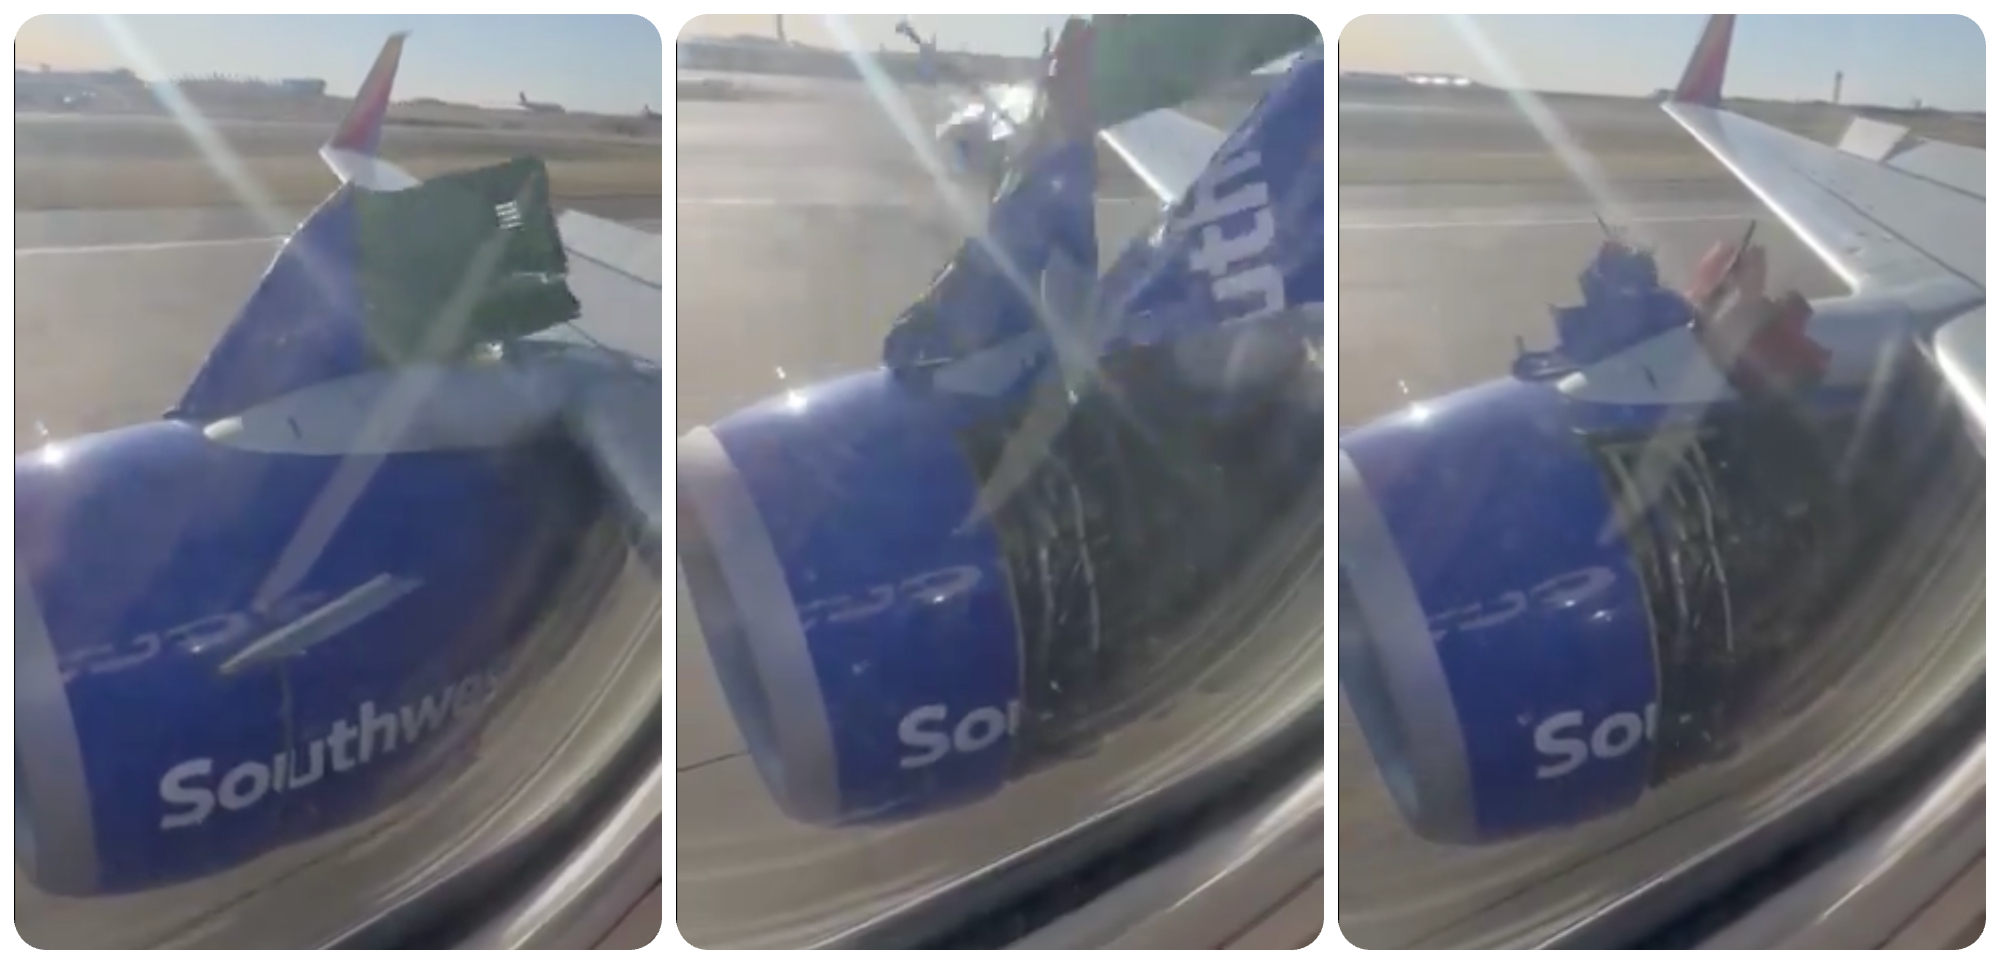 More Boeing woes: engine cover dramatically tears off 737 during take-off